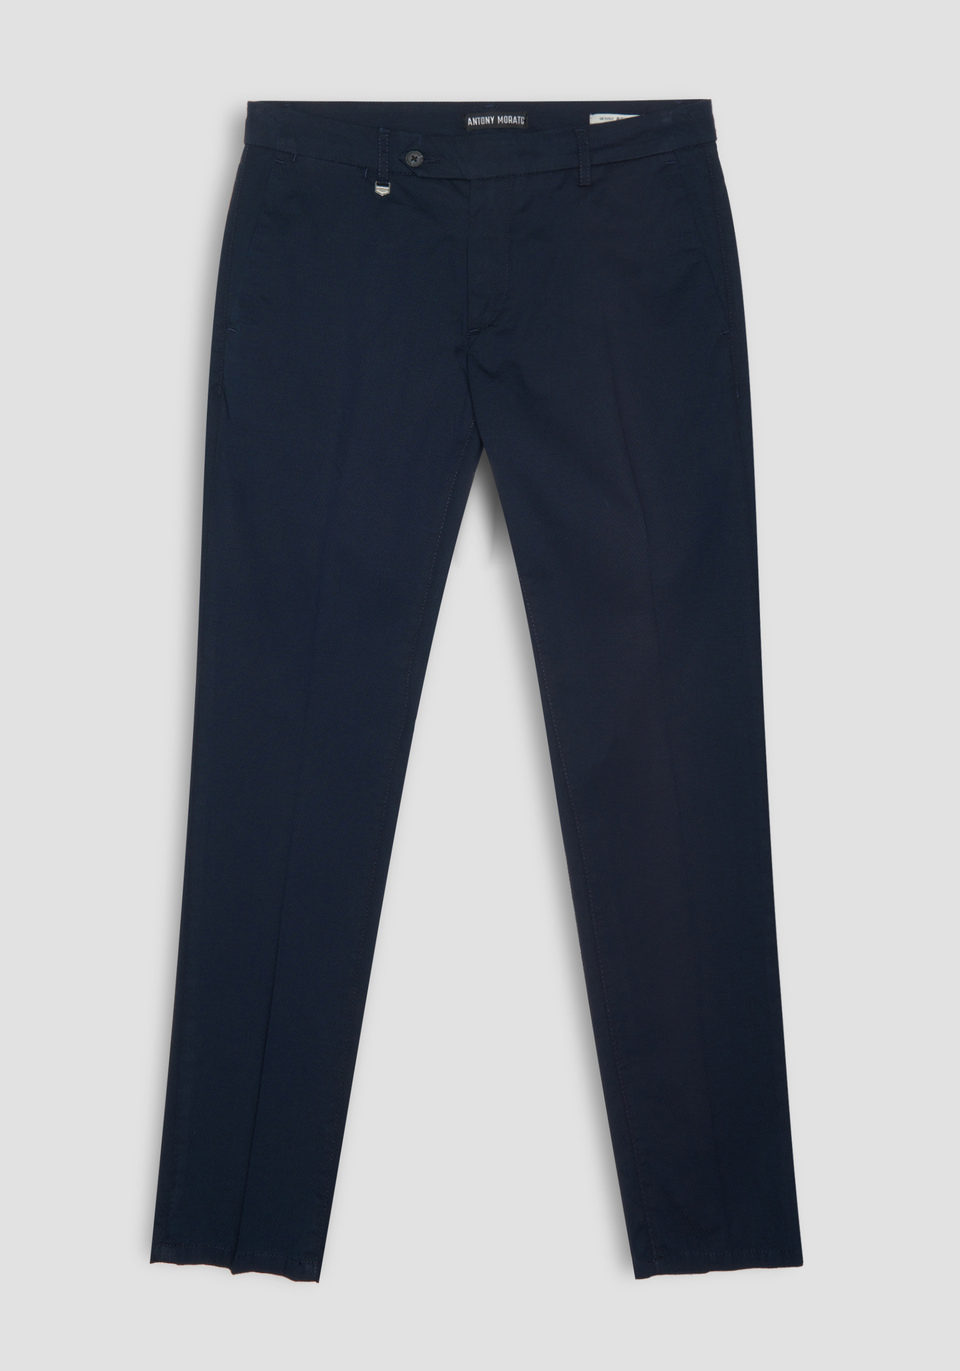 “BRYAN” SKINNY-FIT TROUSERS IN STRETCHY MICRO-WOVEN COTTON - Antony Morato Online Shop